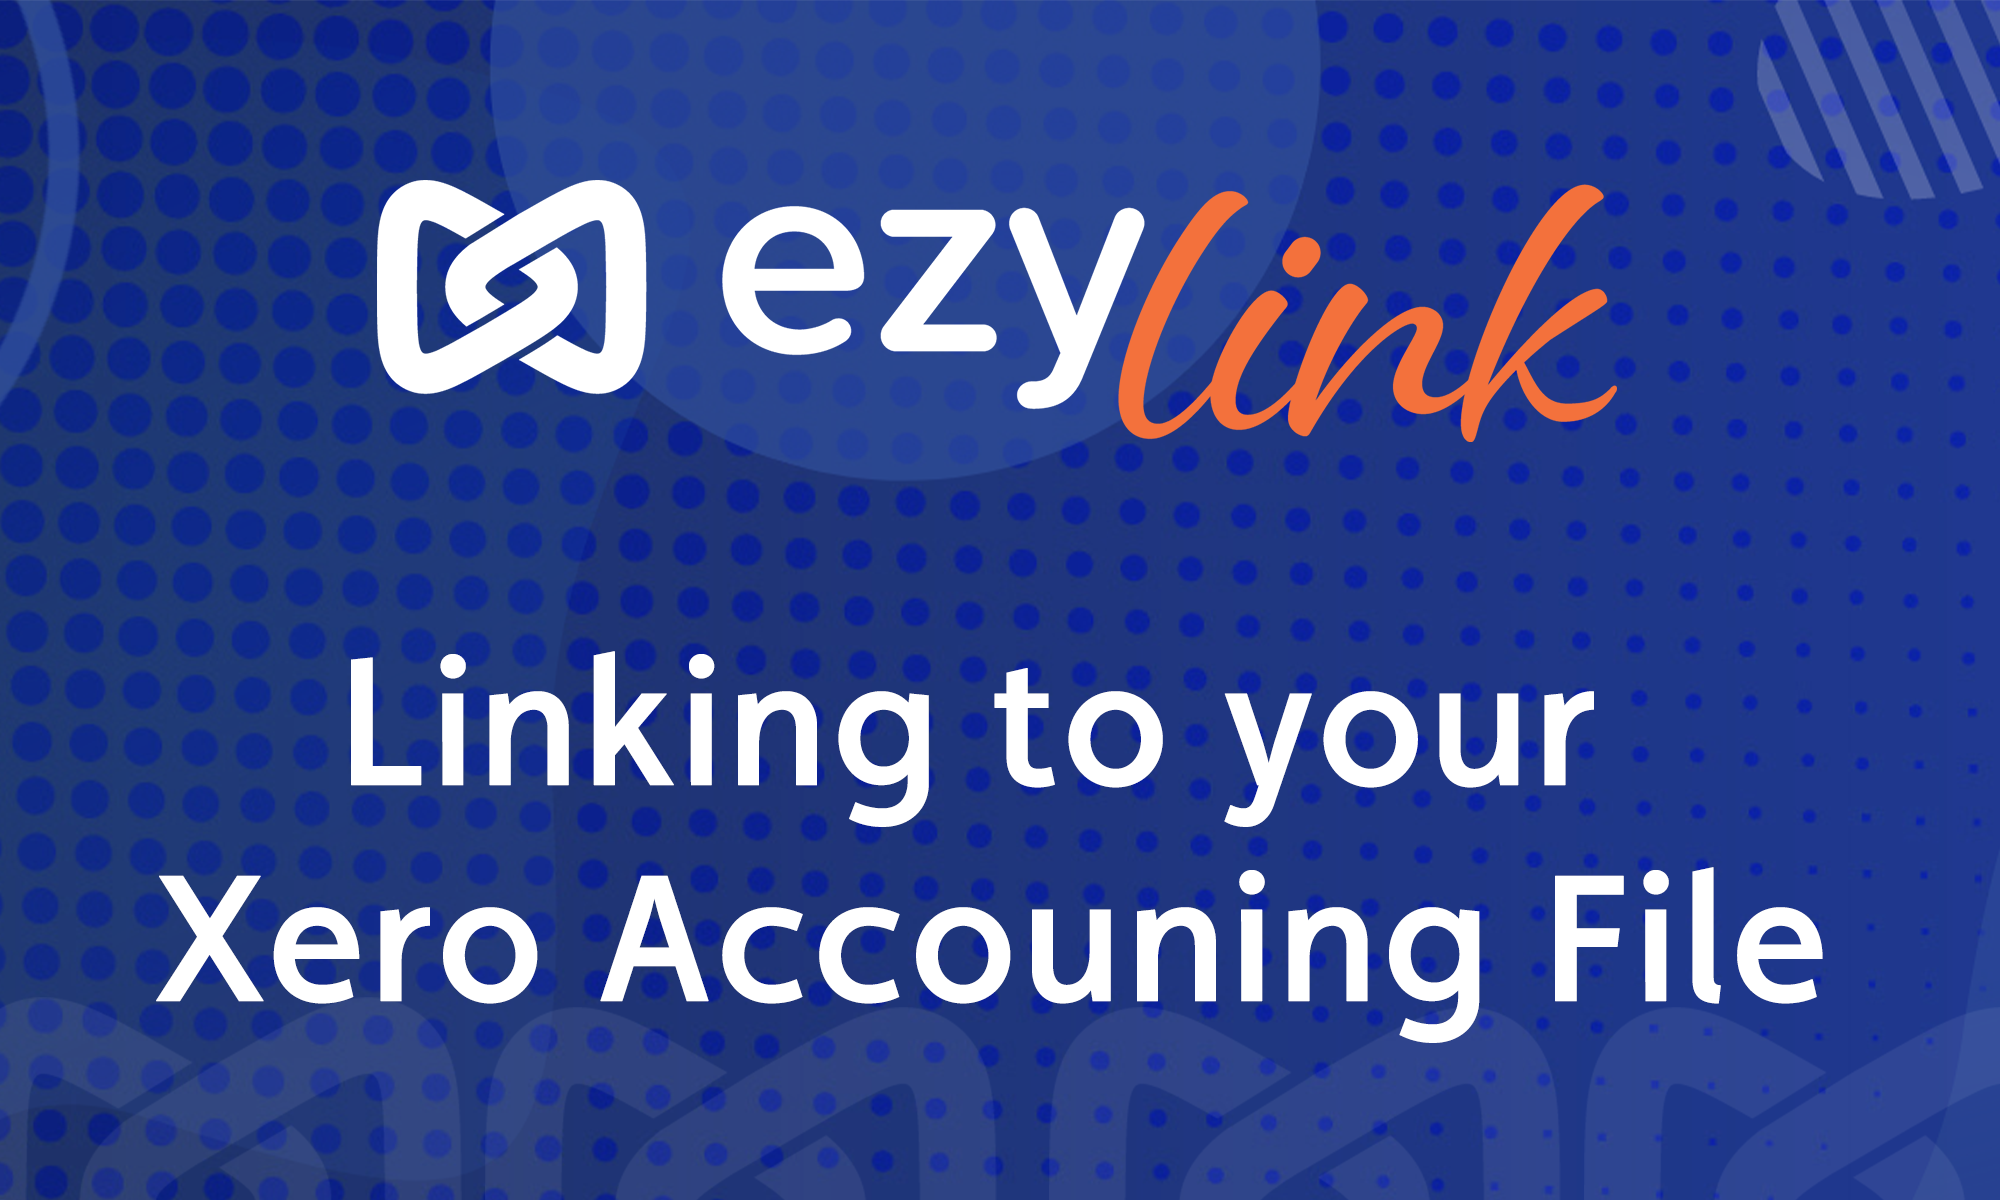 Featured image for “Ezylink Cloud – Connecting Xero”